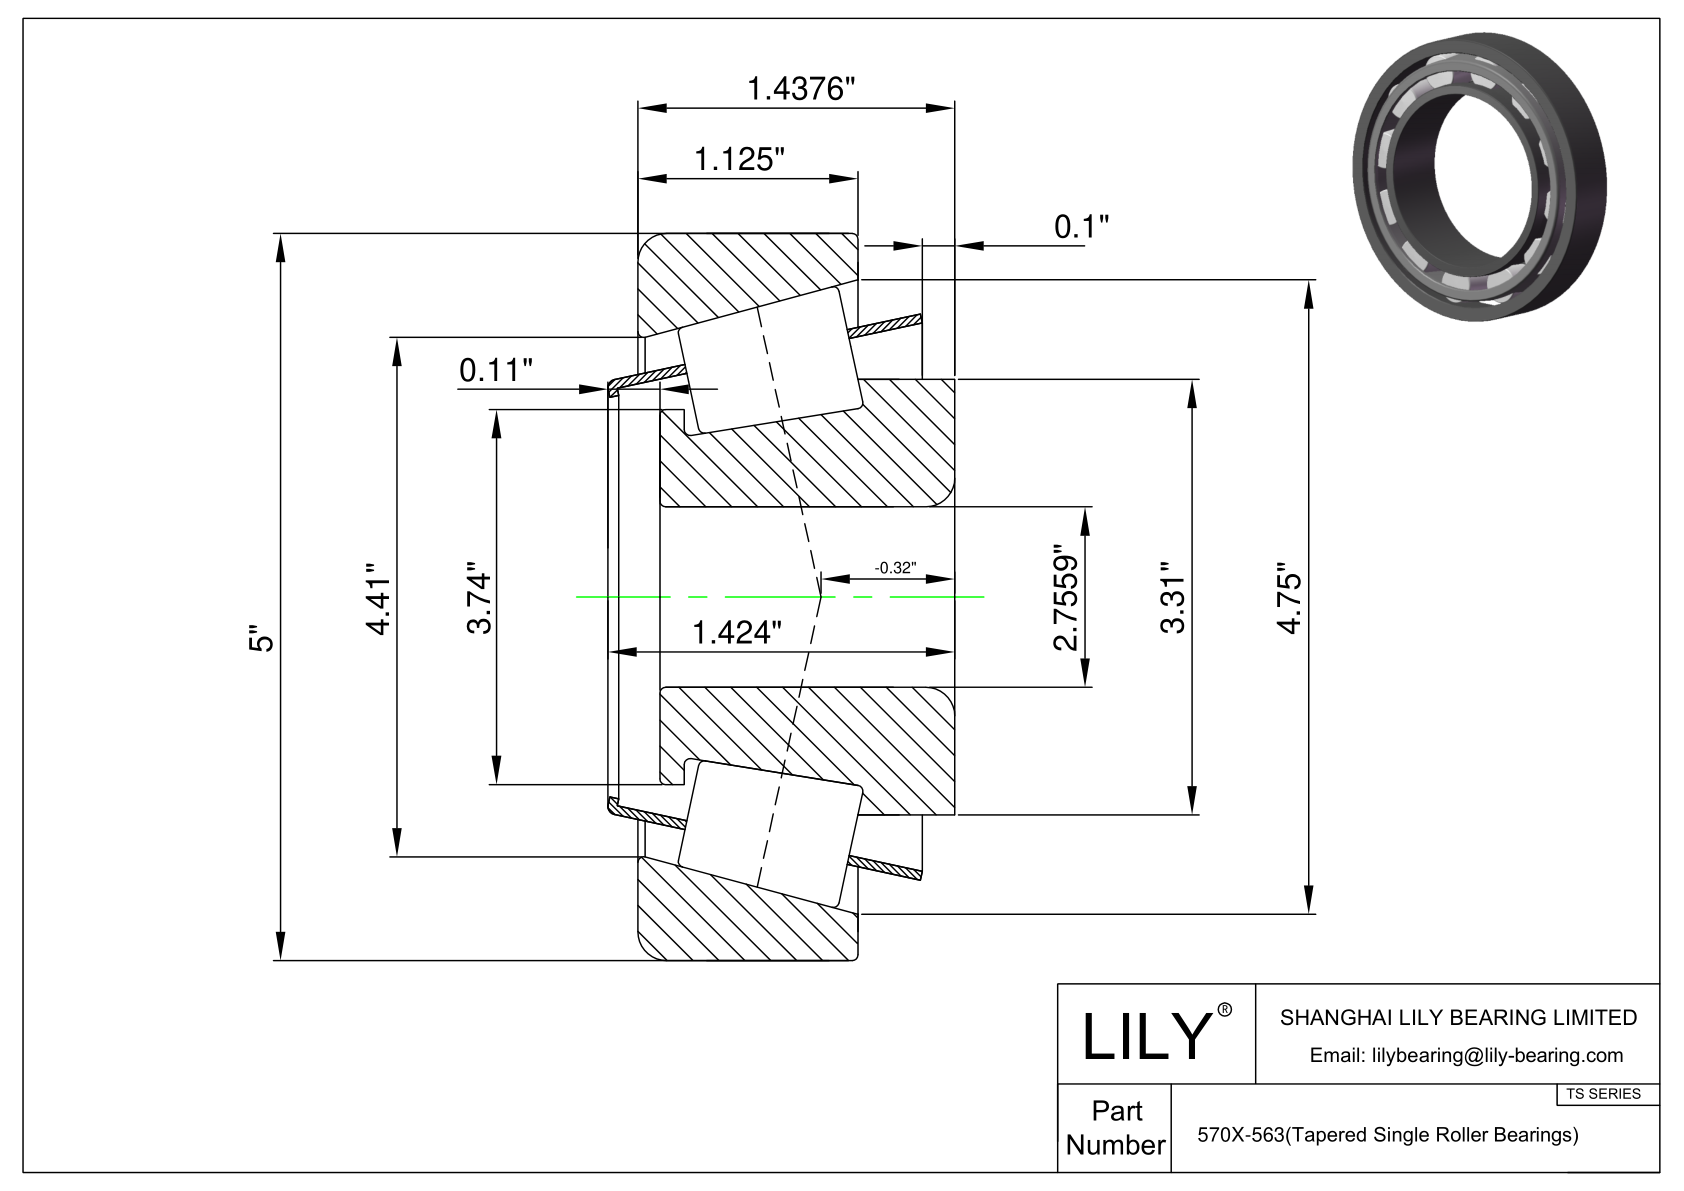 570X-563 TS (Tapered Single Roller Bearings) (Imperial) cad drawing